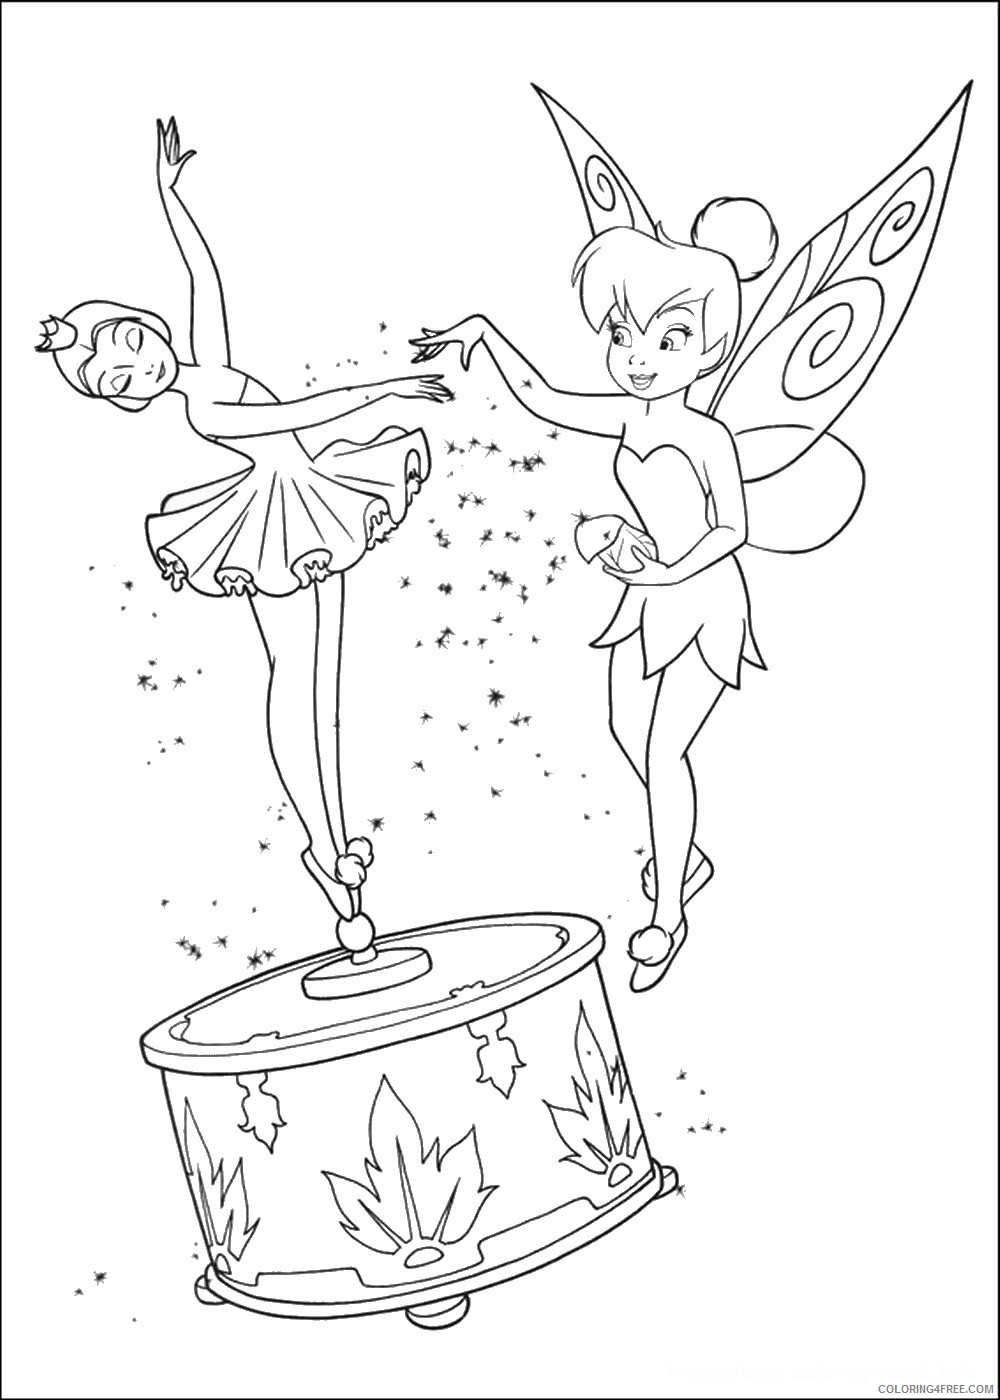 Tinker Bell Coloring Pages Cartoons tinkerbell_cl_05 Printable 2020 6612 Coloring4free